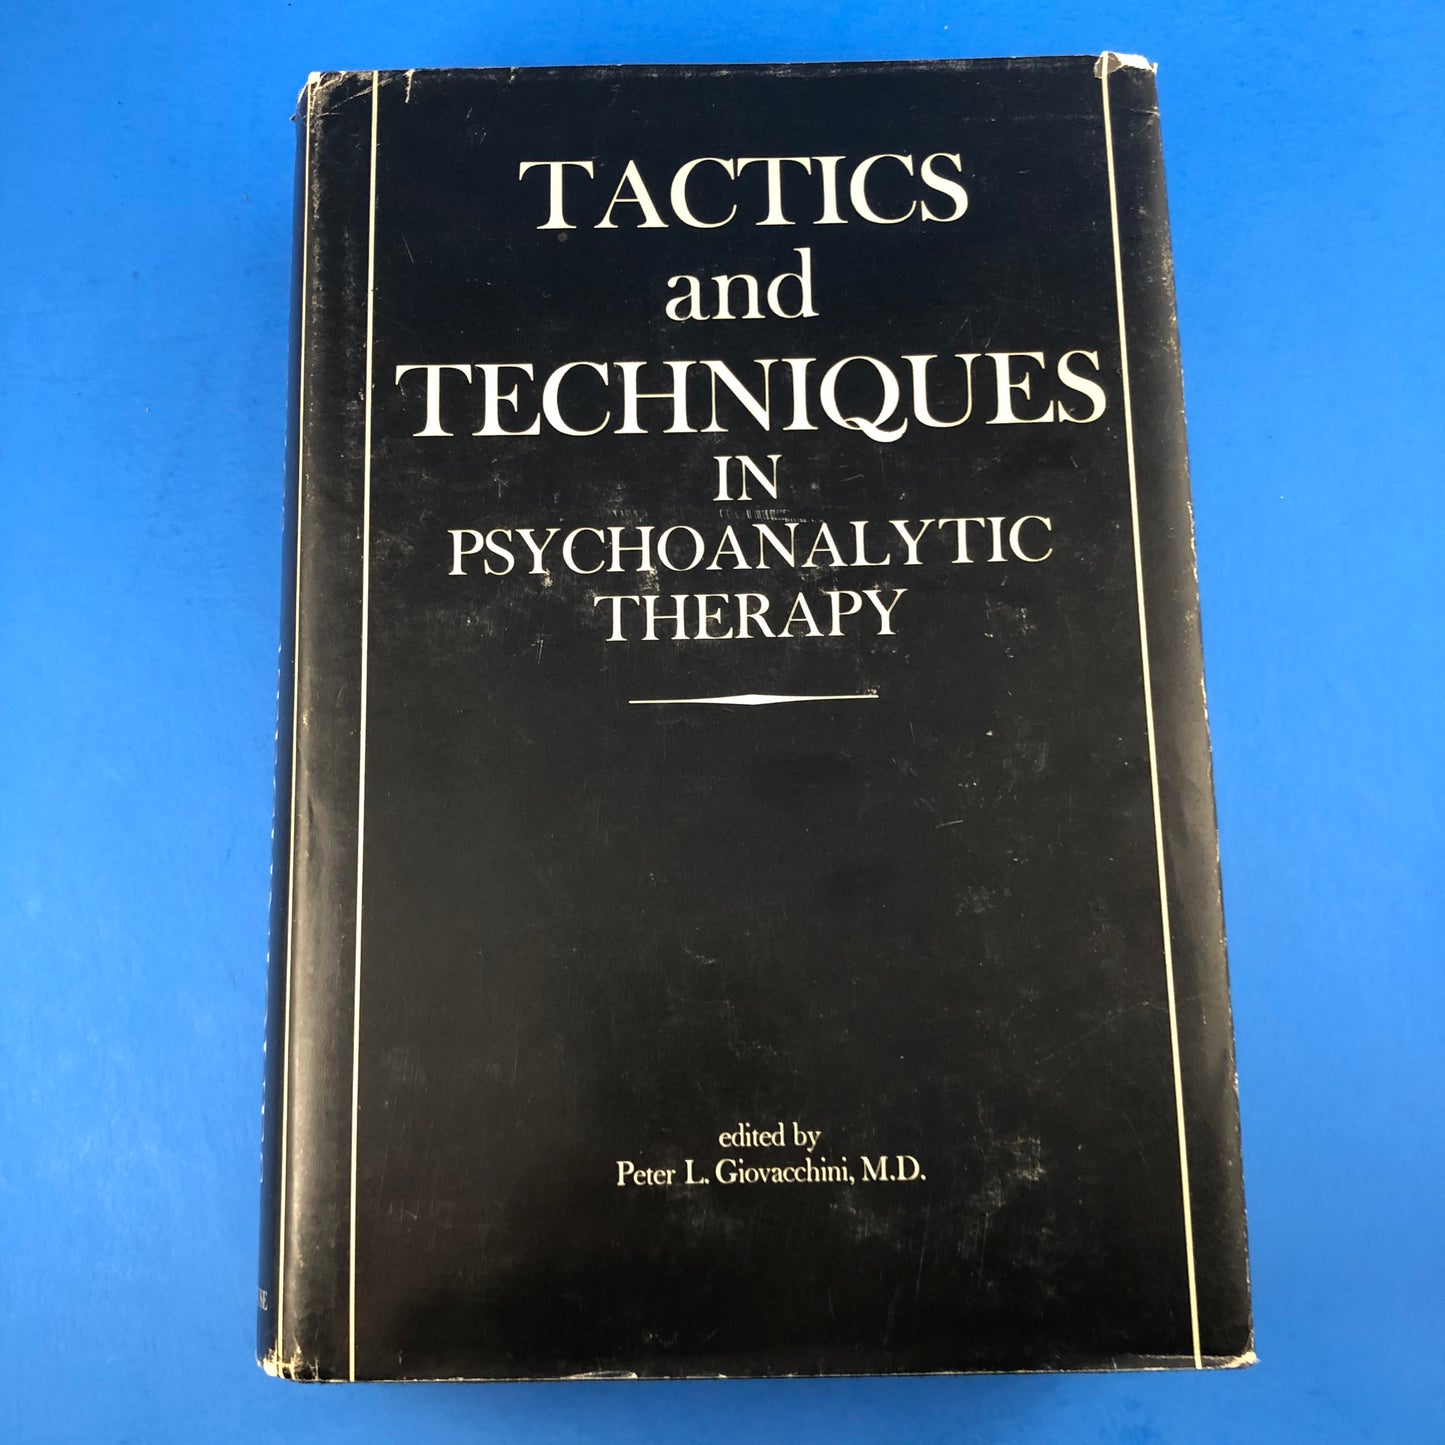 Tactics and Techniques in Psychoanalytic Therapy